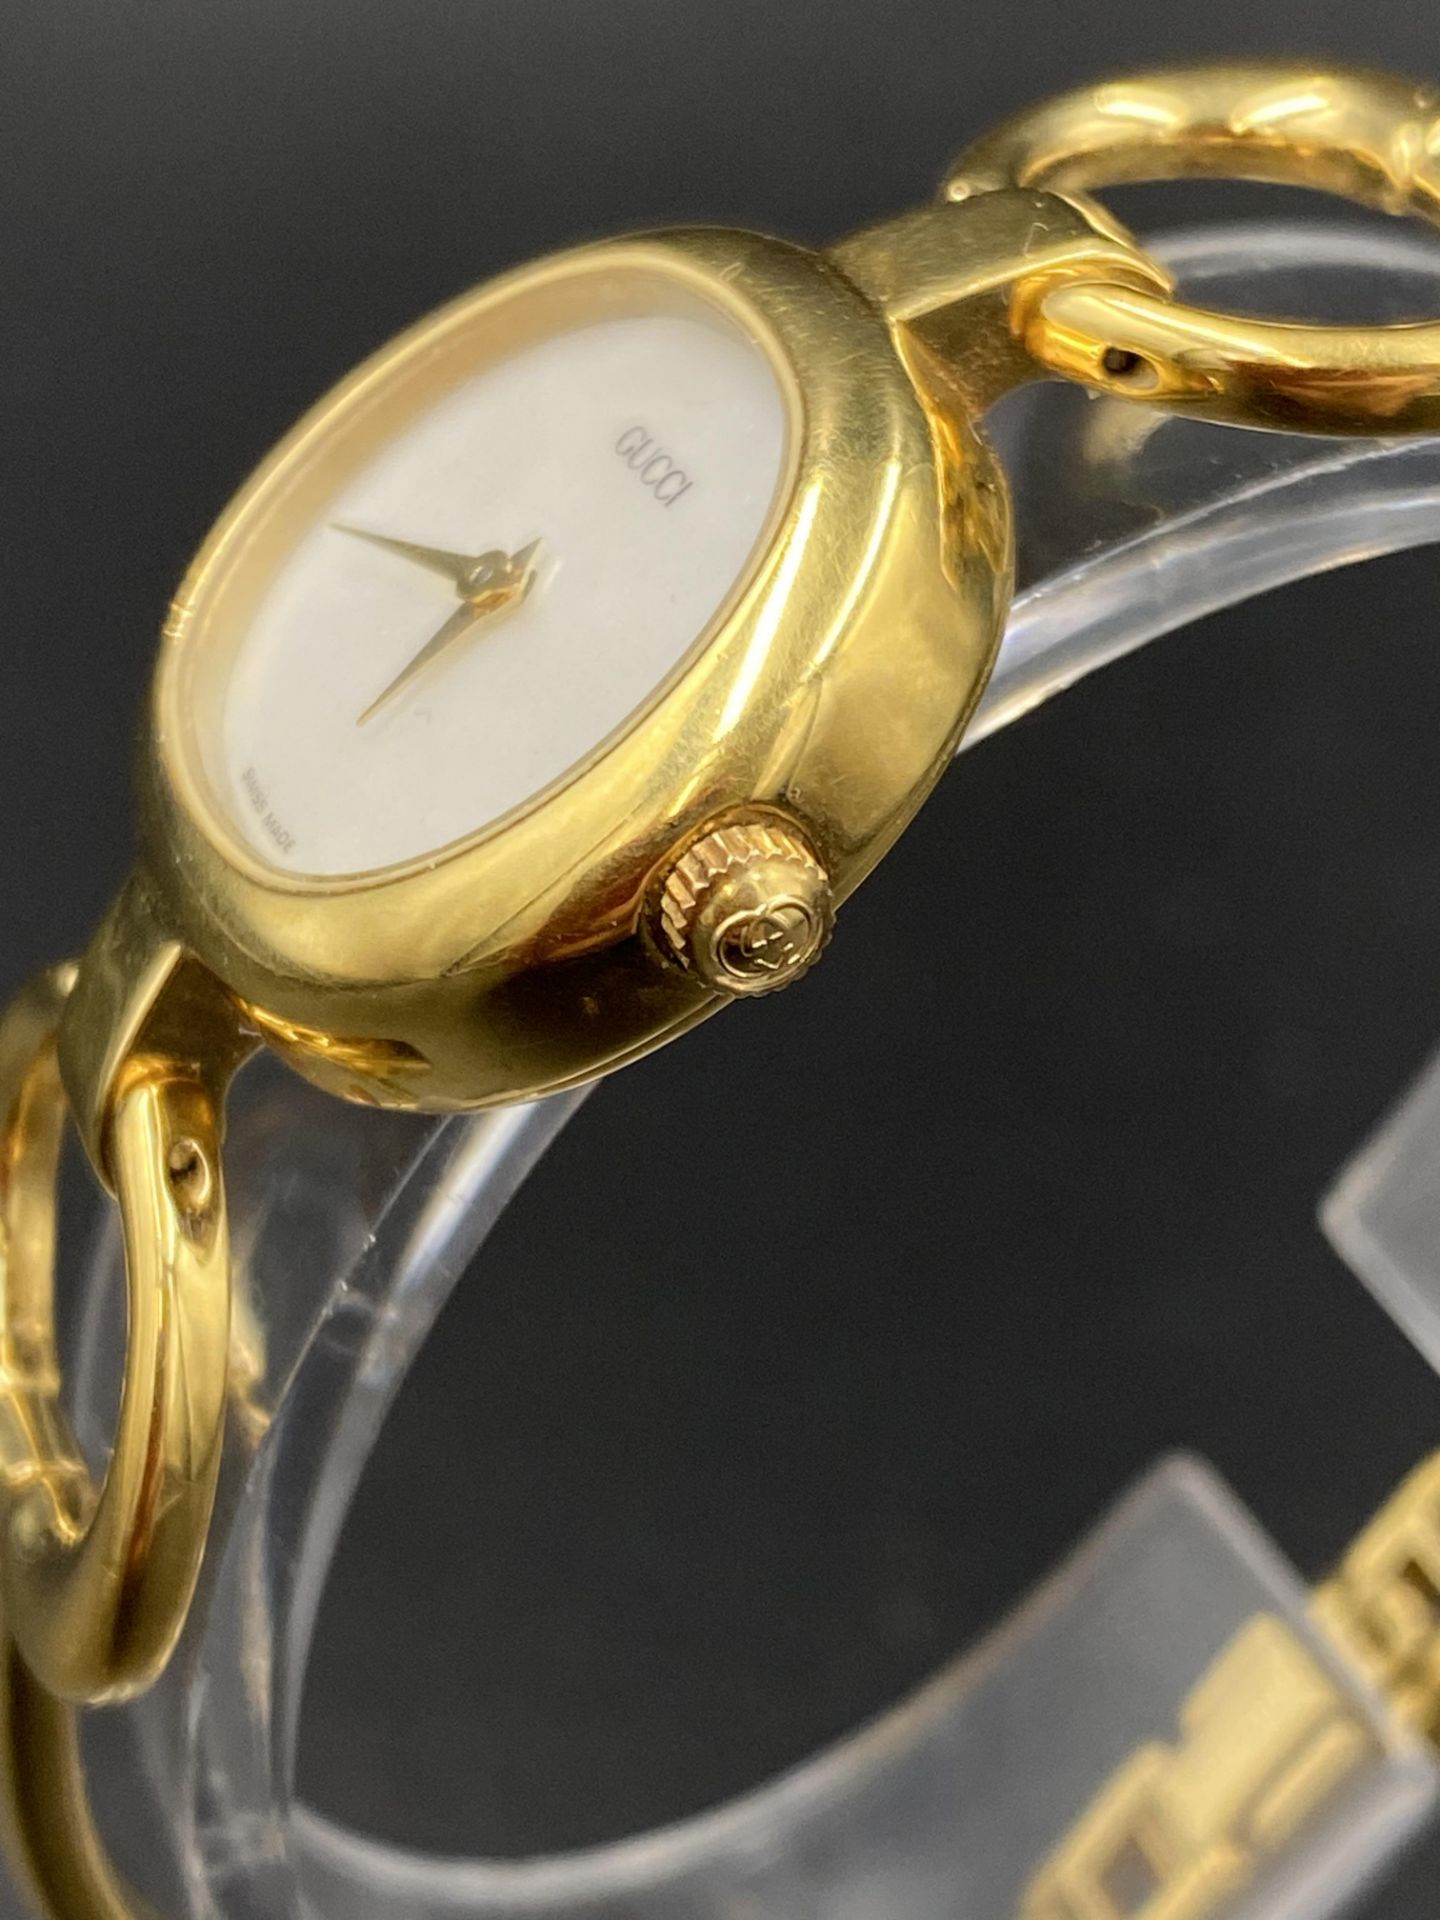 18ct gold ladies Gucci watch - Image 3 of 6